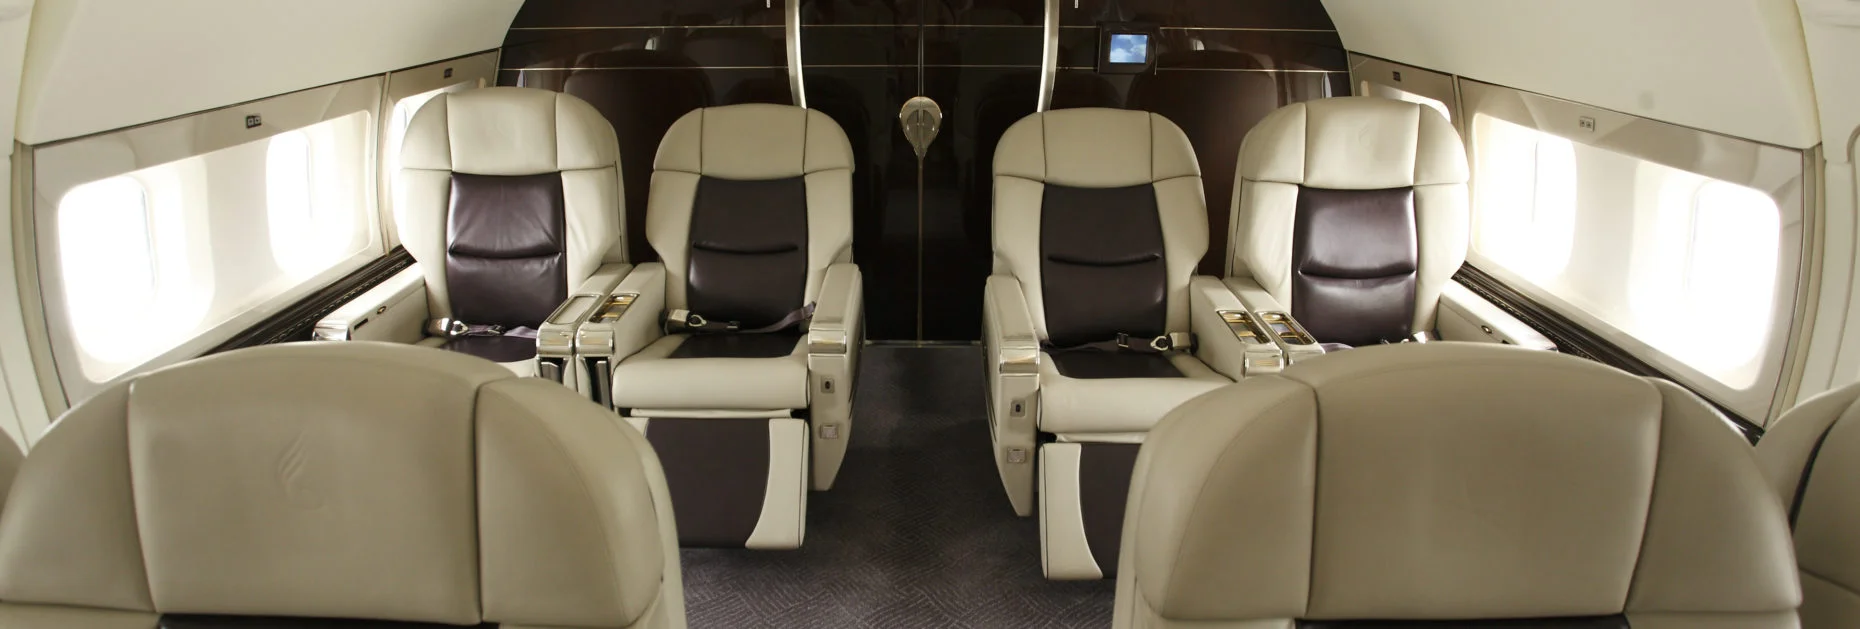 Photo focusing on the stitching and leather quality of first class seats.